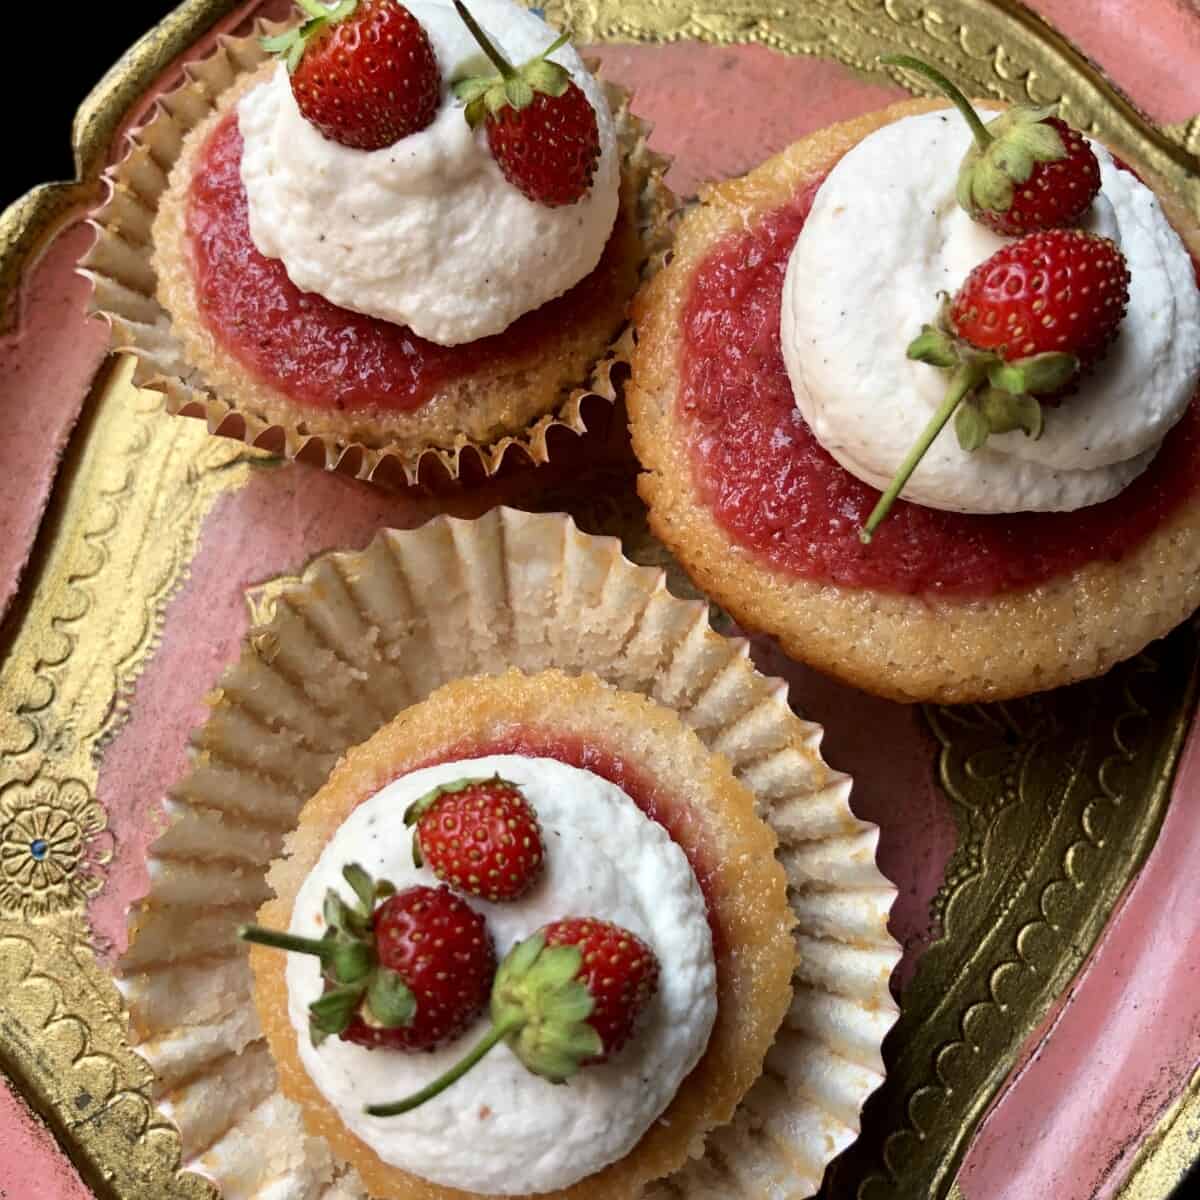 3 strawberry cupcakes with strawberry gelée, and strawberry vanilla bean whipped cream topped with baby wild Italian strawberries